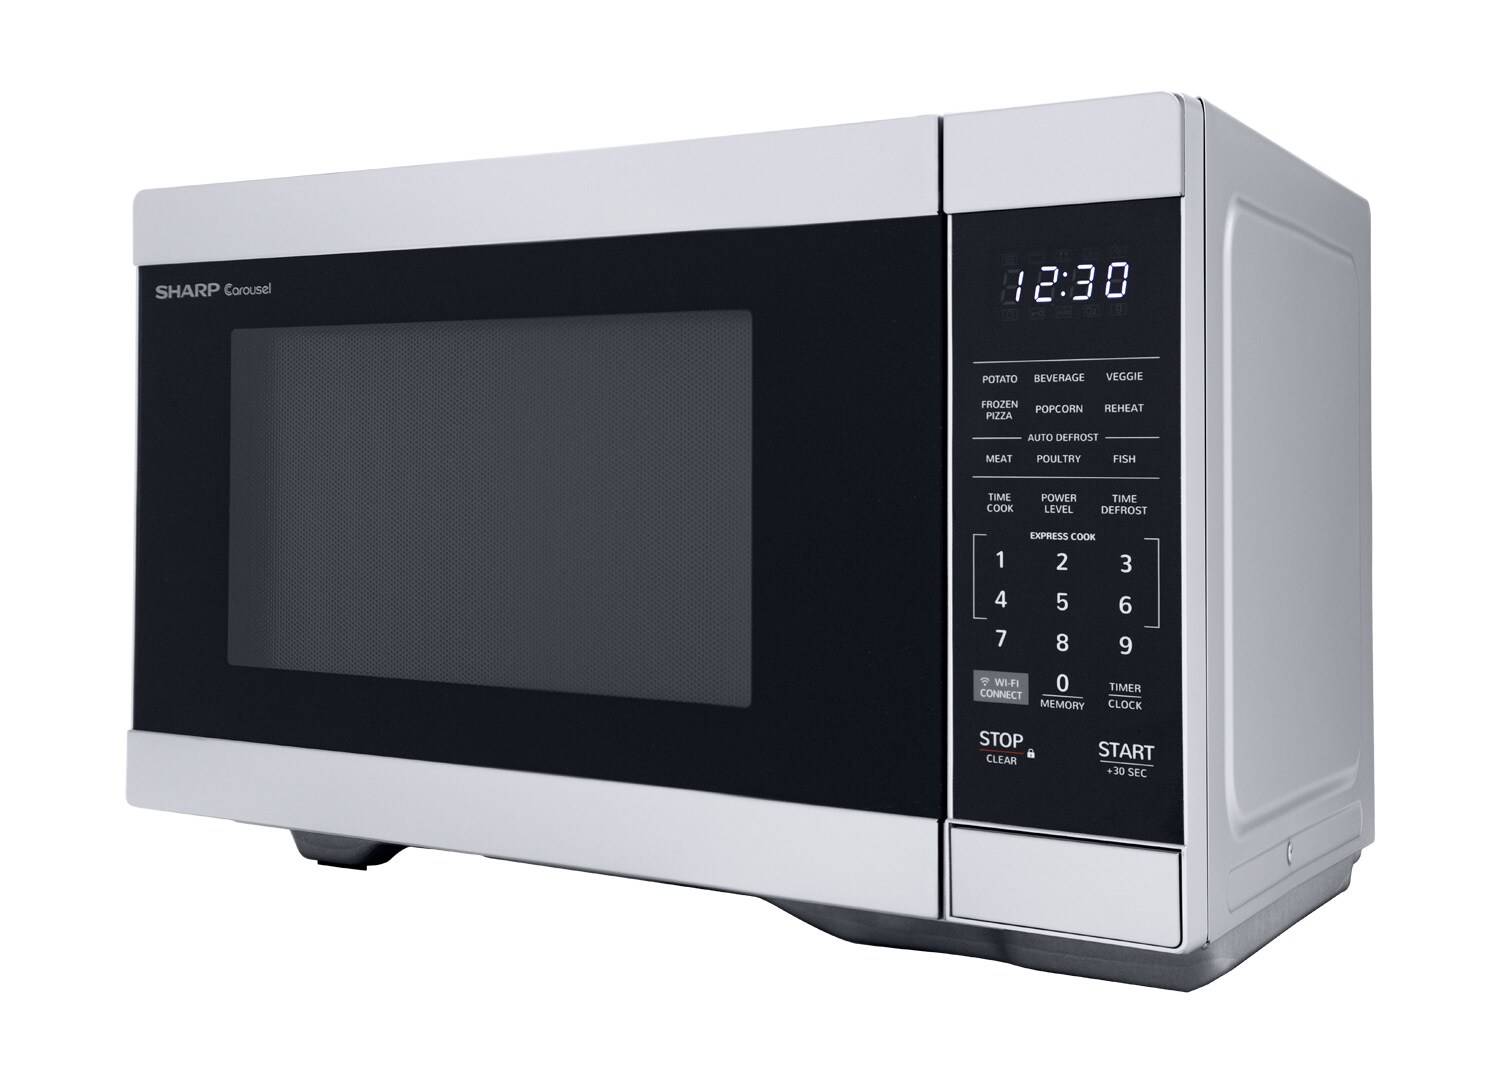 Avanti 1.1 Cu. ft. Stainless Steel Microwave Oven 1000 W Mirror-Finish